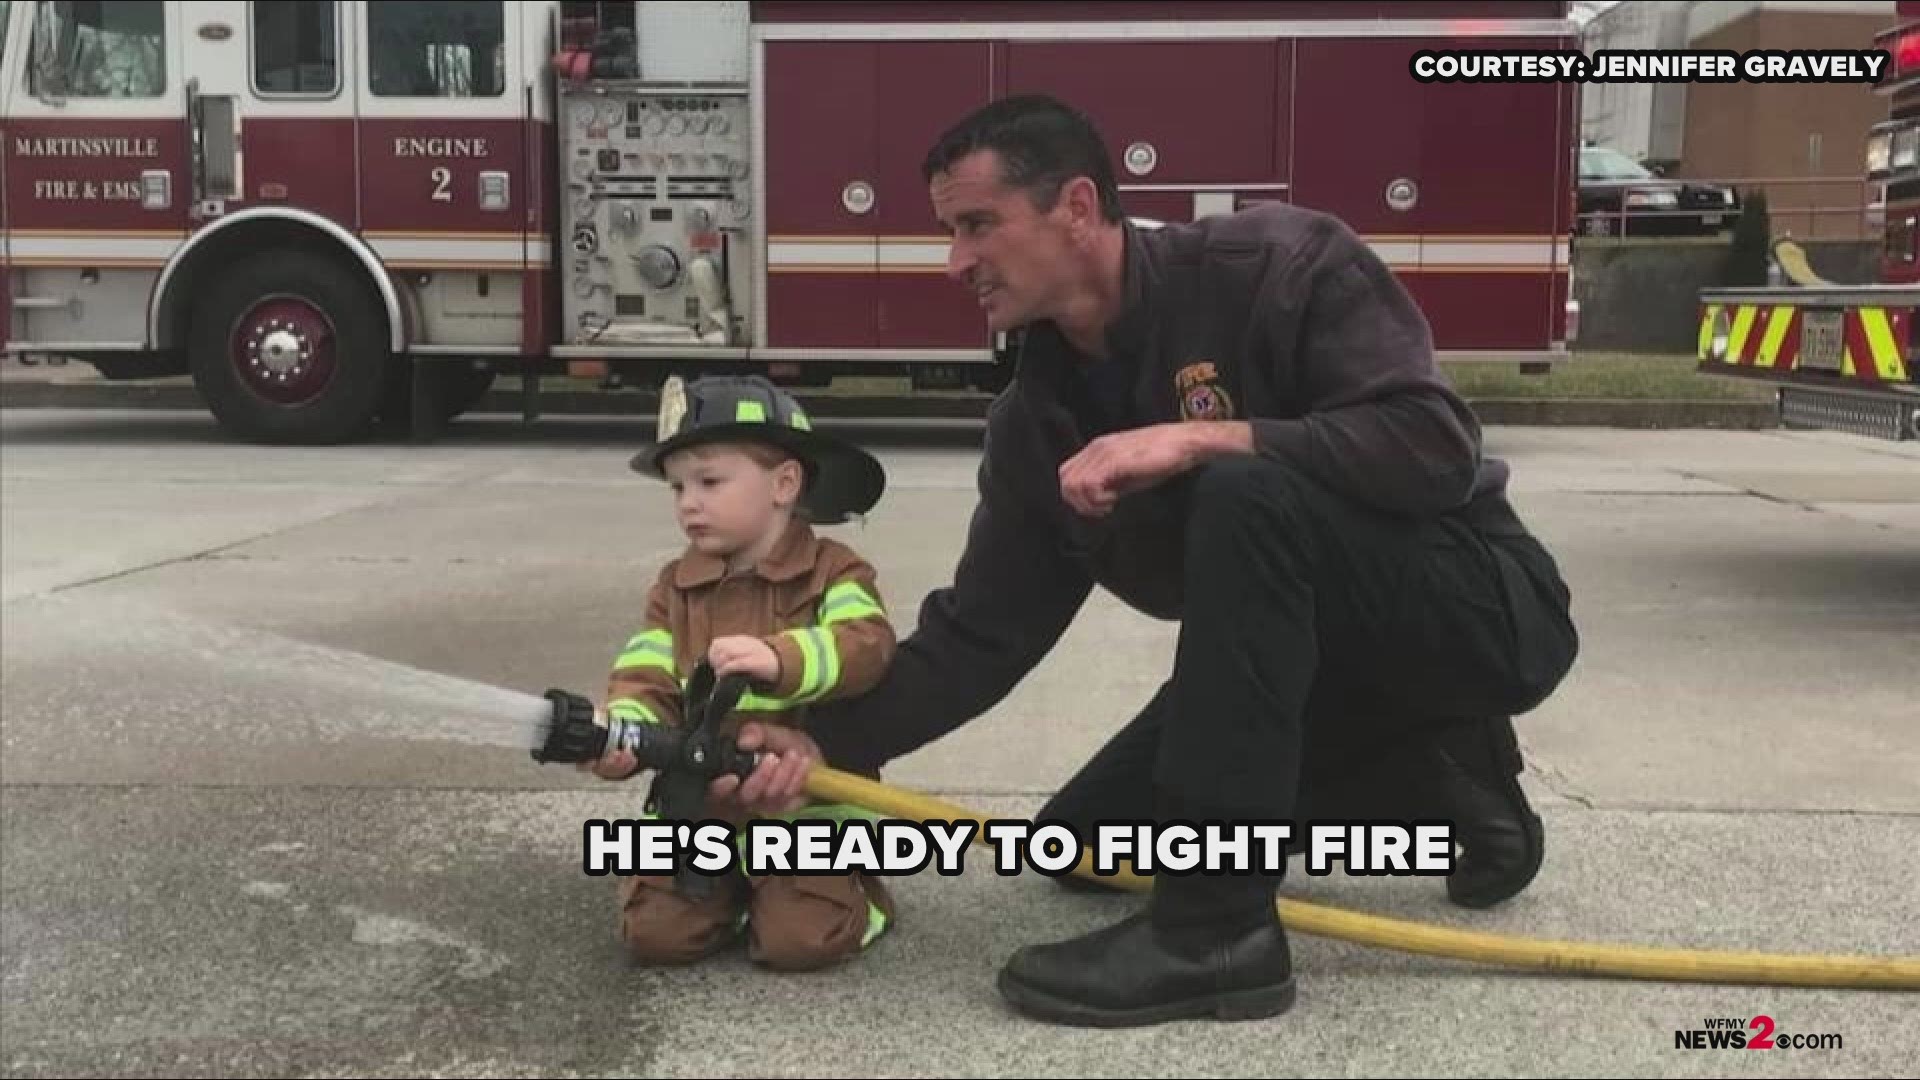 3-year-old, Quinn Gravely just celebrated his birthday thanks to the Martinsville Fire Department. A group of firefighters surprised the boy after finding out he loves the fire department. Quinn’s father died of cancer in 2017. The firefighters knew they had to do something special for him.